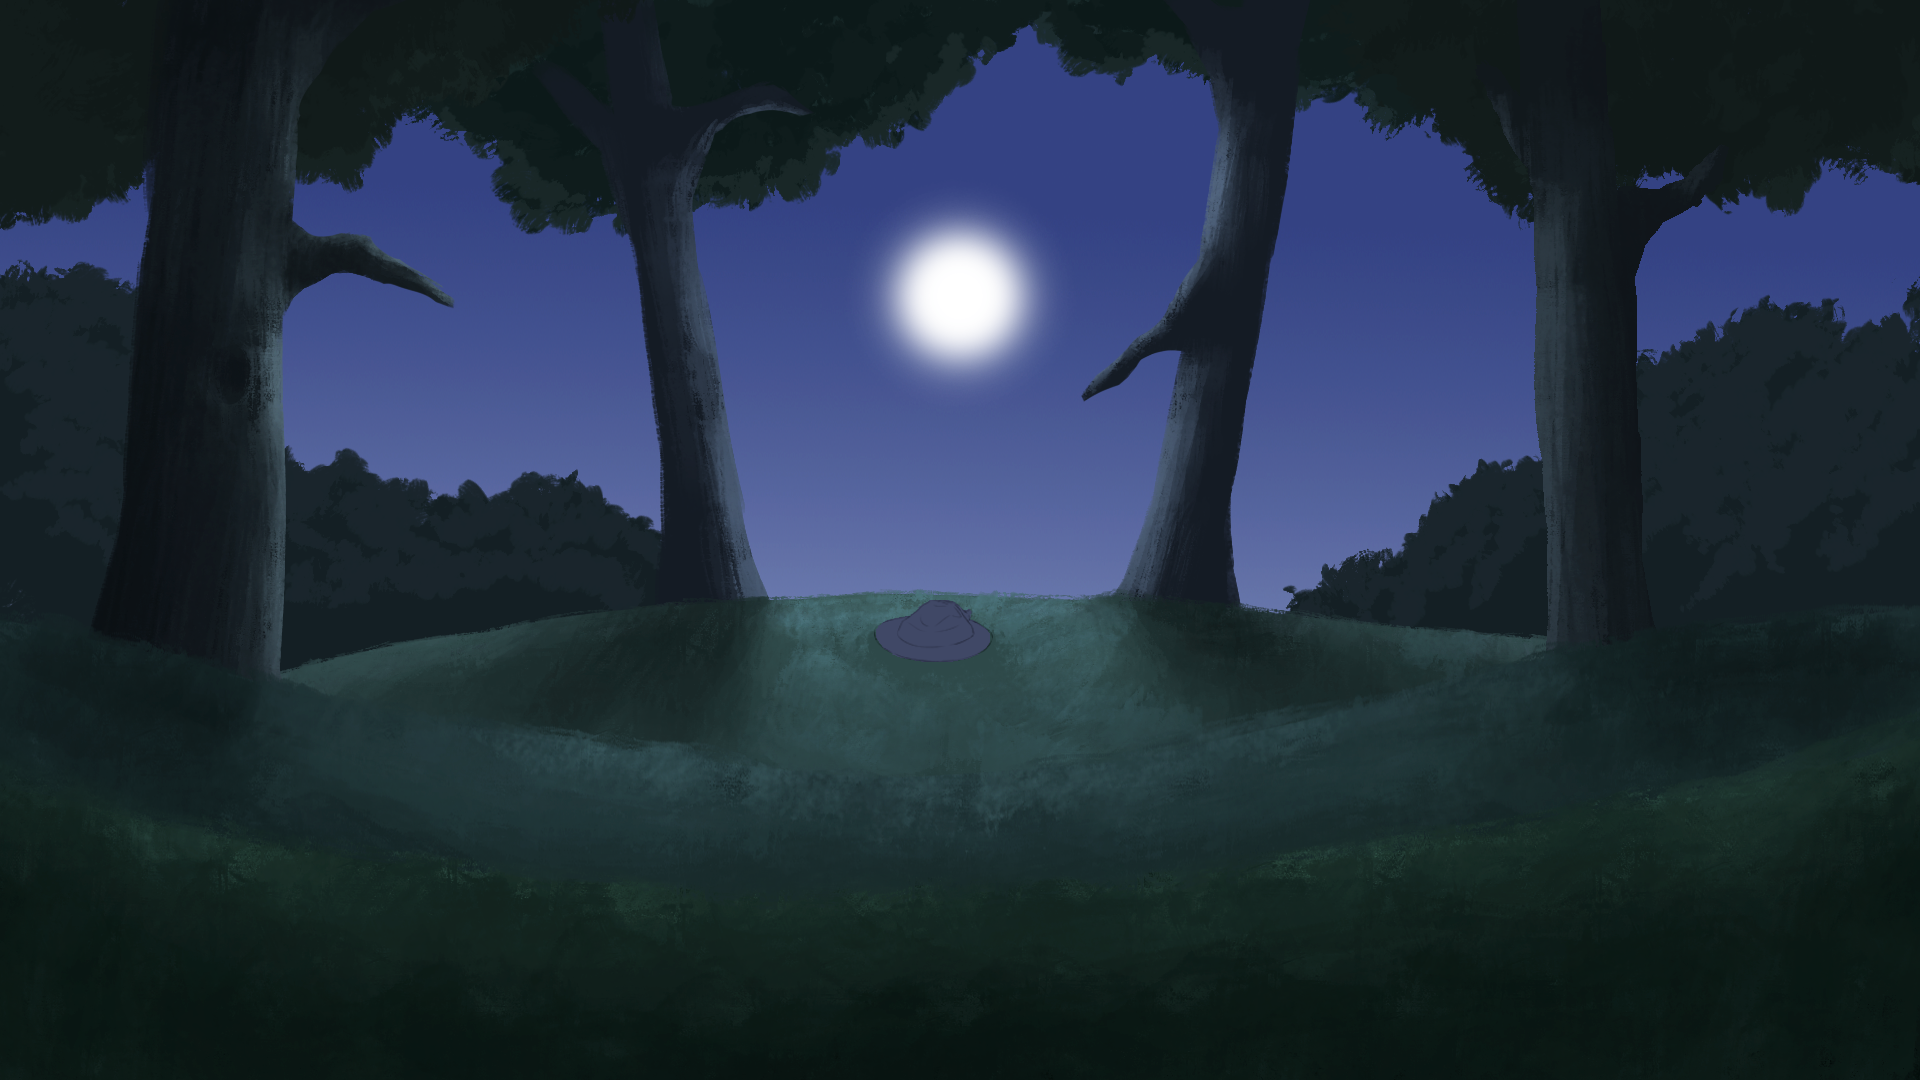 Background digital painting by George Squires showing a nighttime forrest and moon.